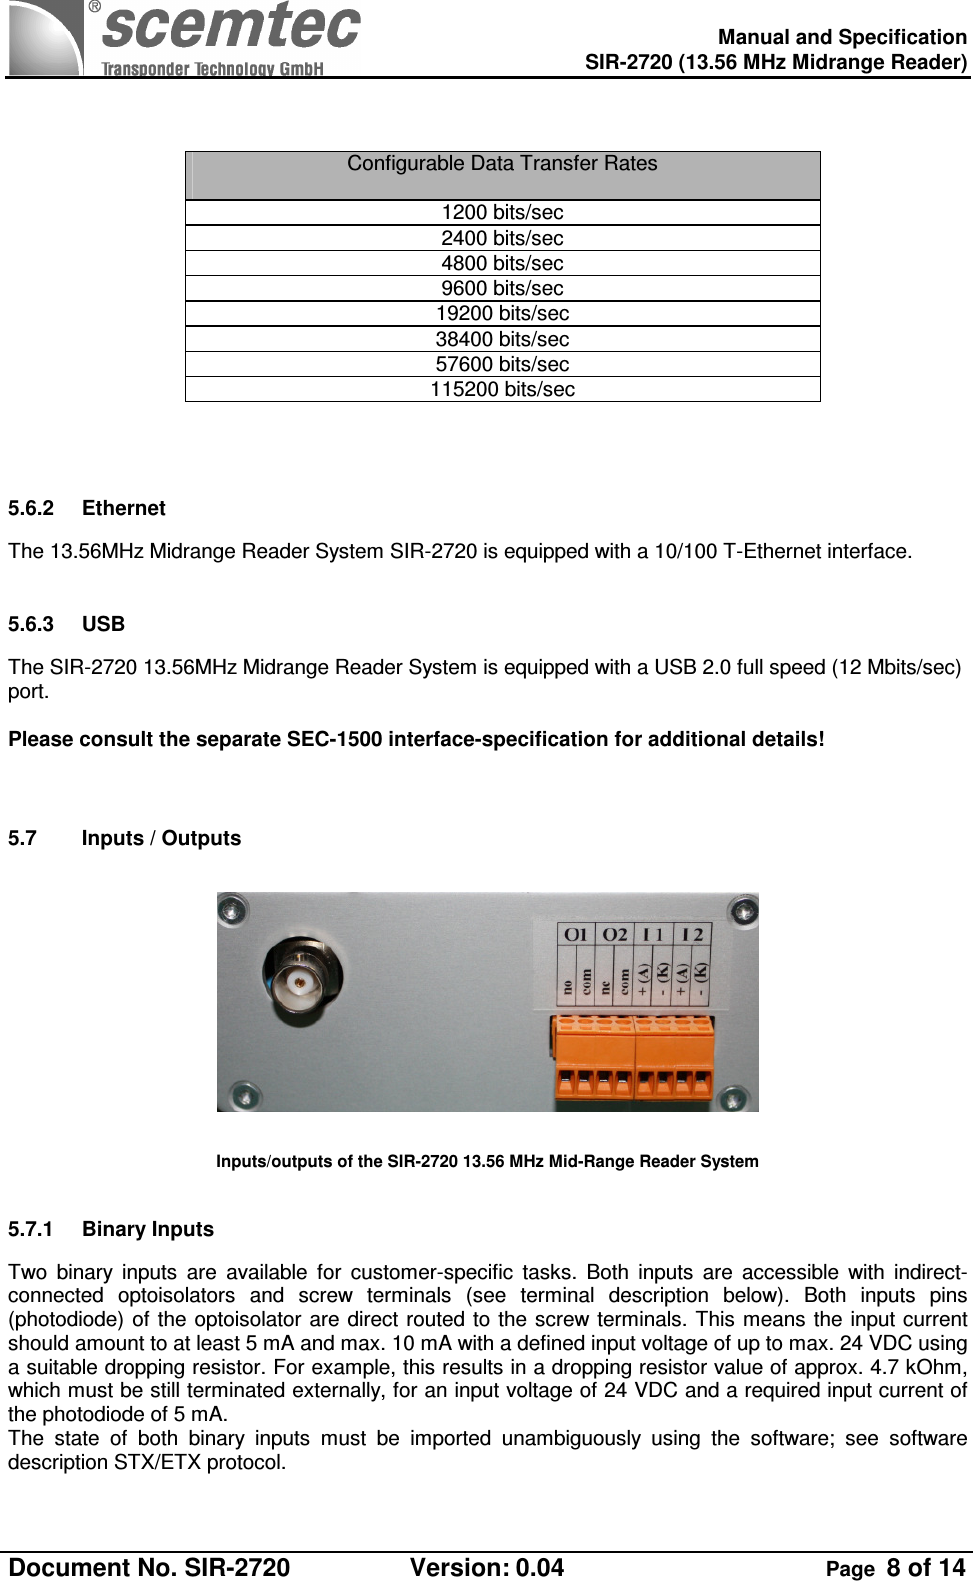    Manual and Specification  SIR-2720 (13.56 MHz Midrange Reader)  Document No. SIR-2720  Version: 0.04  Page  8 of 14     Configurable Data Transfer Rates   1200 bits/sec 2400 bits/sec 4800 bits/sec 9600 bits/sec 19200 bits/sec 38400 bits/sec 57600 bits/sec 115200 bits/sec  5.6.2  Ethernet The 13.56MHz Midrange Reader System SIR-2720 is equipped with a 10/100 T-Ethernet interface.  5.6.3  USB  The SIR-2720 13.56MHz Midrange Reader System is equipped with a USB 2.0 full speed (12 Mbits/sec) port.  Please consult the separate SEC-1500 interface-specification for additional details!   5.7  Inputs / Outputs     Inputs/outputs of the SIR-2720 13.56 MHz Mid-Range Reader System  5.7.1  Binary Inputs Two  binary  inputs  are  available  for  customer-specific  tasks.  Both  inputs  are  accessible  with  indirect-connected  optoisolators  and  screw  terminals  (see  terminal  description  below).  Both  inputs  pins (photodiode) of  the optoisolator are  direct routed to  the screw terminals. This means the input current should amount to at least 5 mA and max. 10 mA with a defined input voltage of up to max. 24 VDC using a suitable dropping resistor. For example, this results in a dropping resistor value of approx. 4.7 kOhm, which must be still terminated externally, for an input voltage of 24 VDC and a required input current of the photodiode of 5 mA. The  state  of  both  binary  inputs  must  be  imported  unambiguously  using  the  software;  see  software description STX/ETX protocol. 